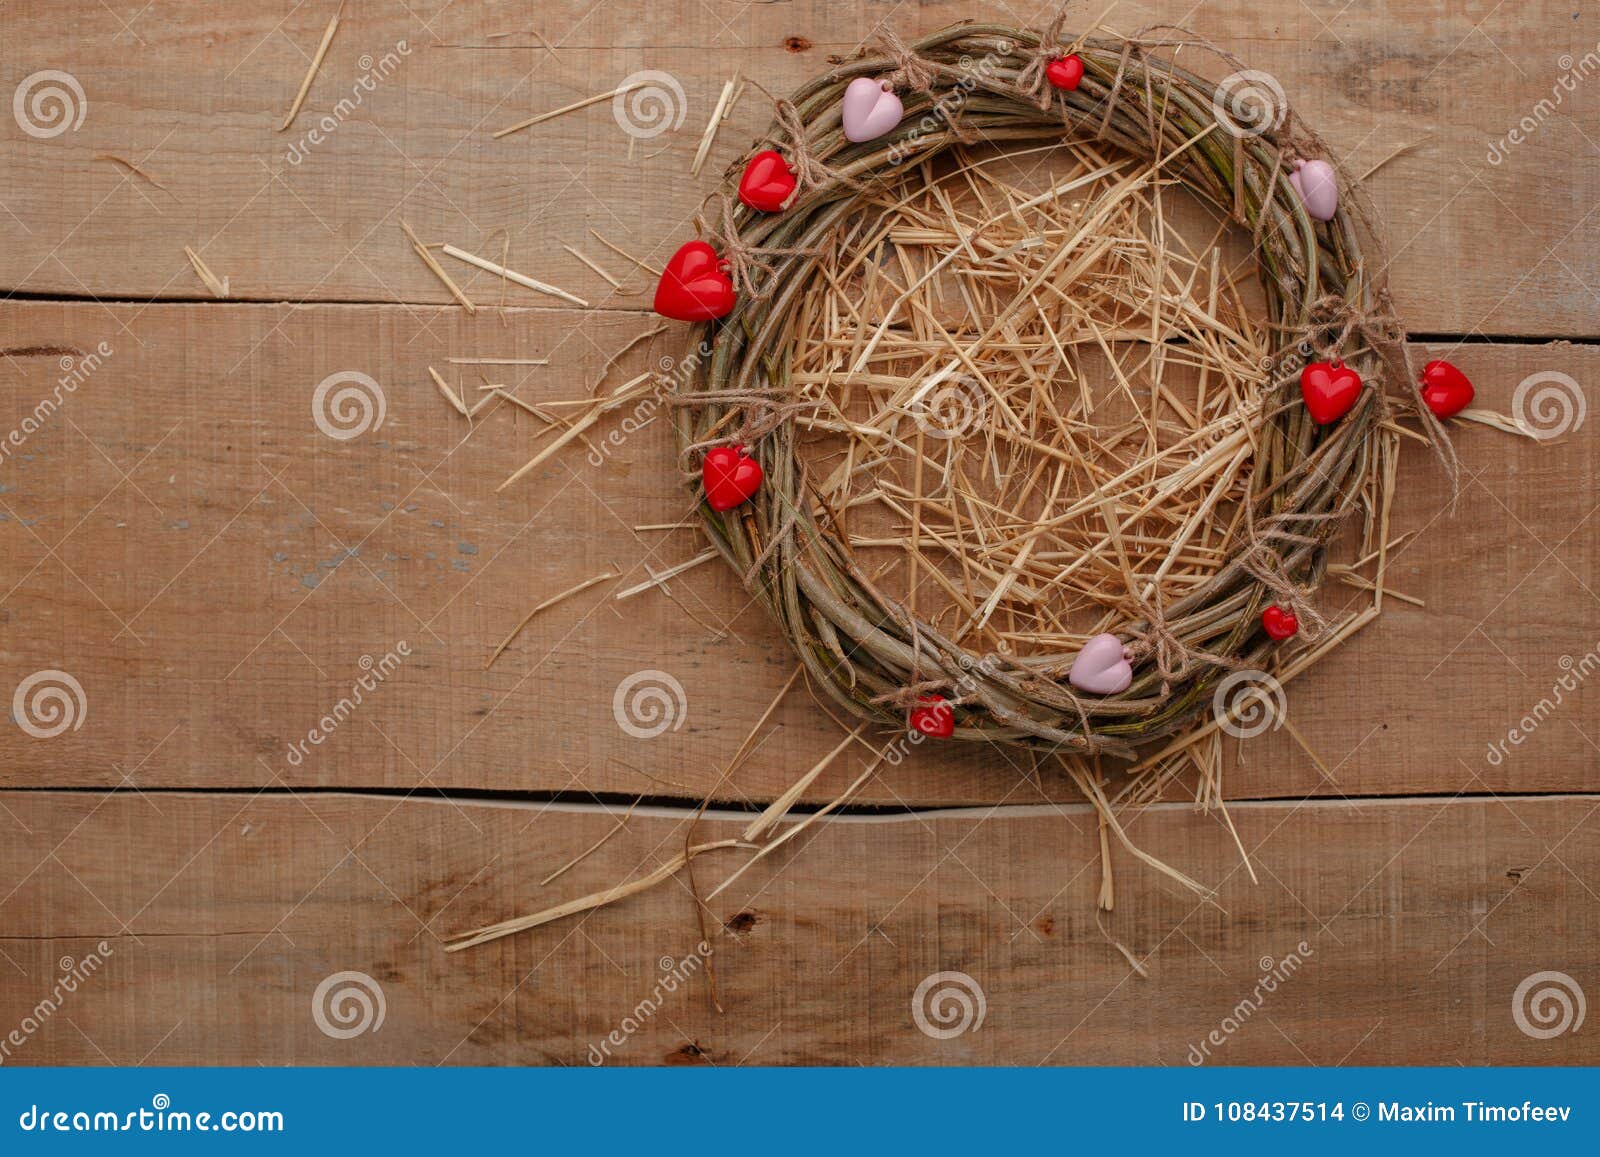 Happy Valentines Day Love Celebration in a Rustic Style . Stock Photo ...